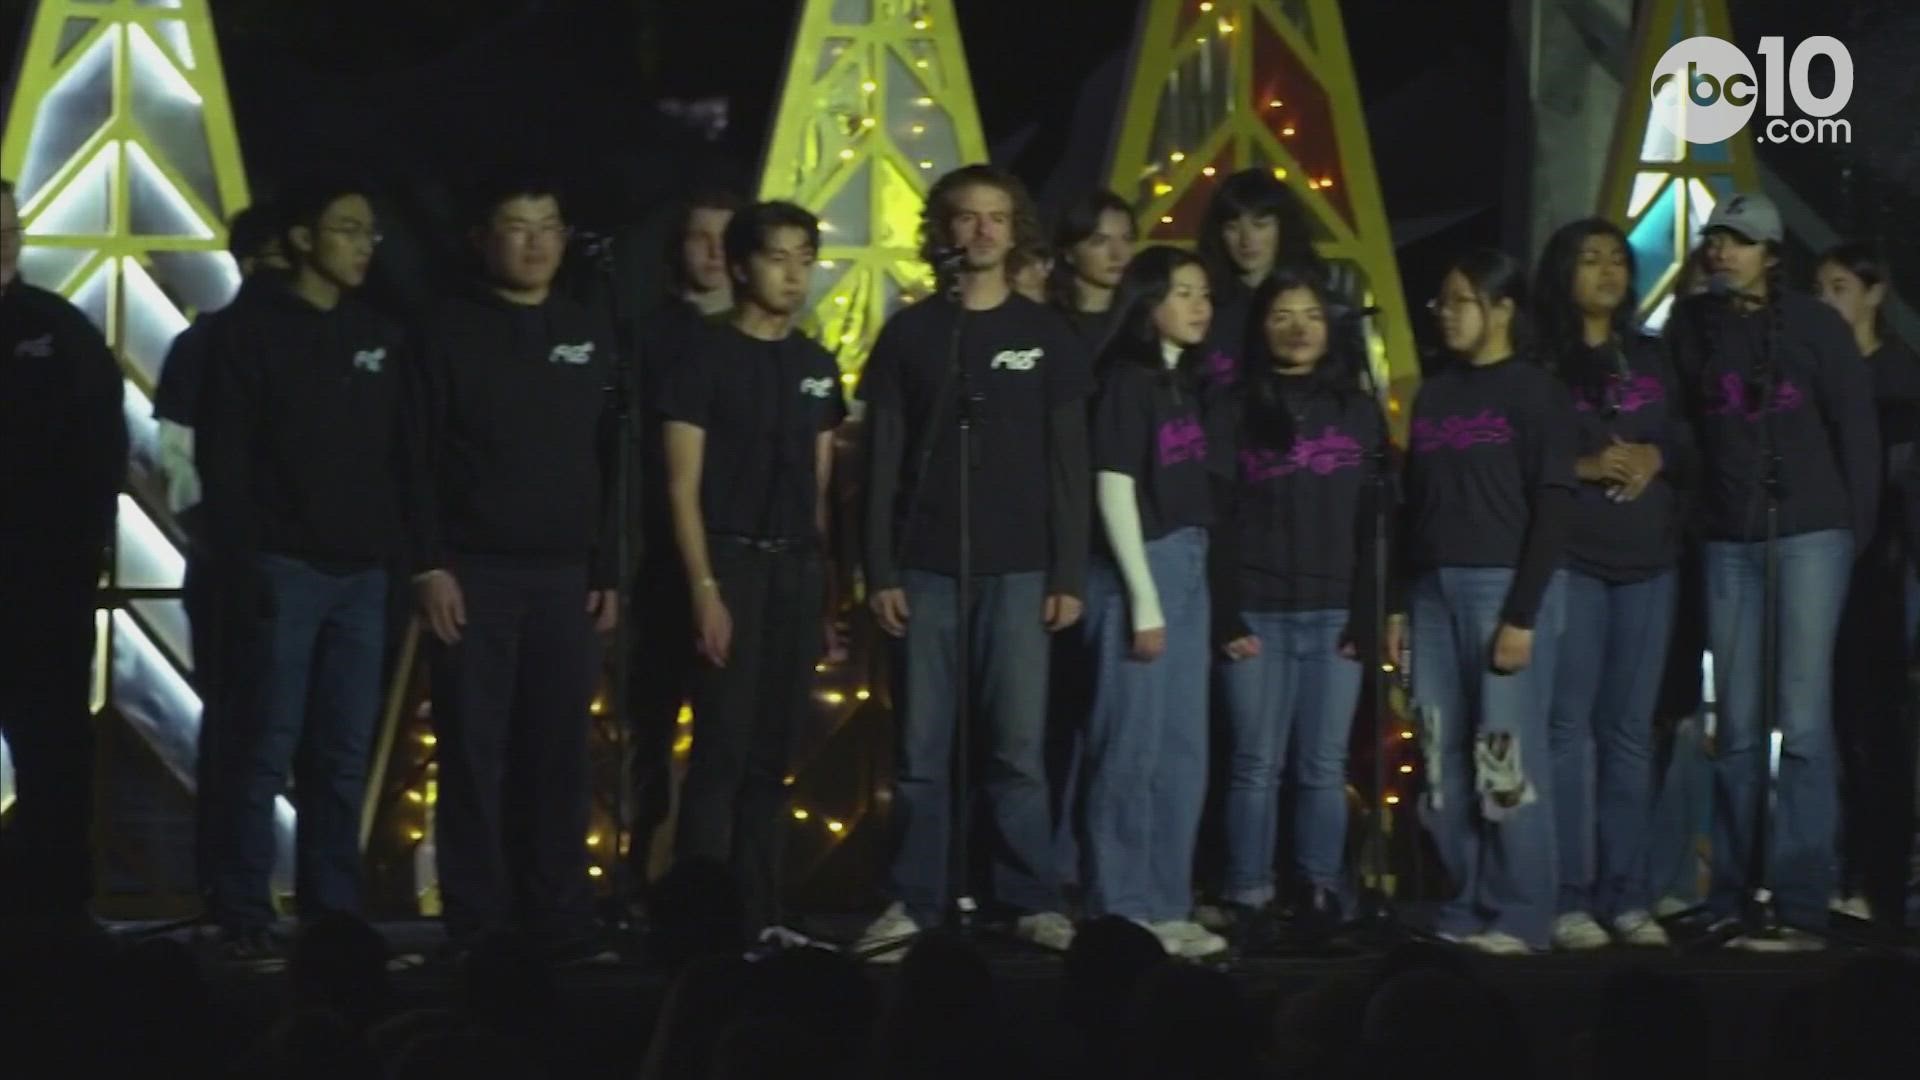 Both The Afterglow and The Spokes performed an acapella version of the Christmas classic 'Jingle Bells' during a holiday tree lighting ceremony with Gov. Newsom.